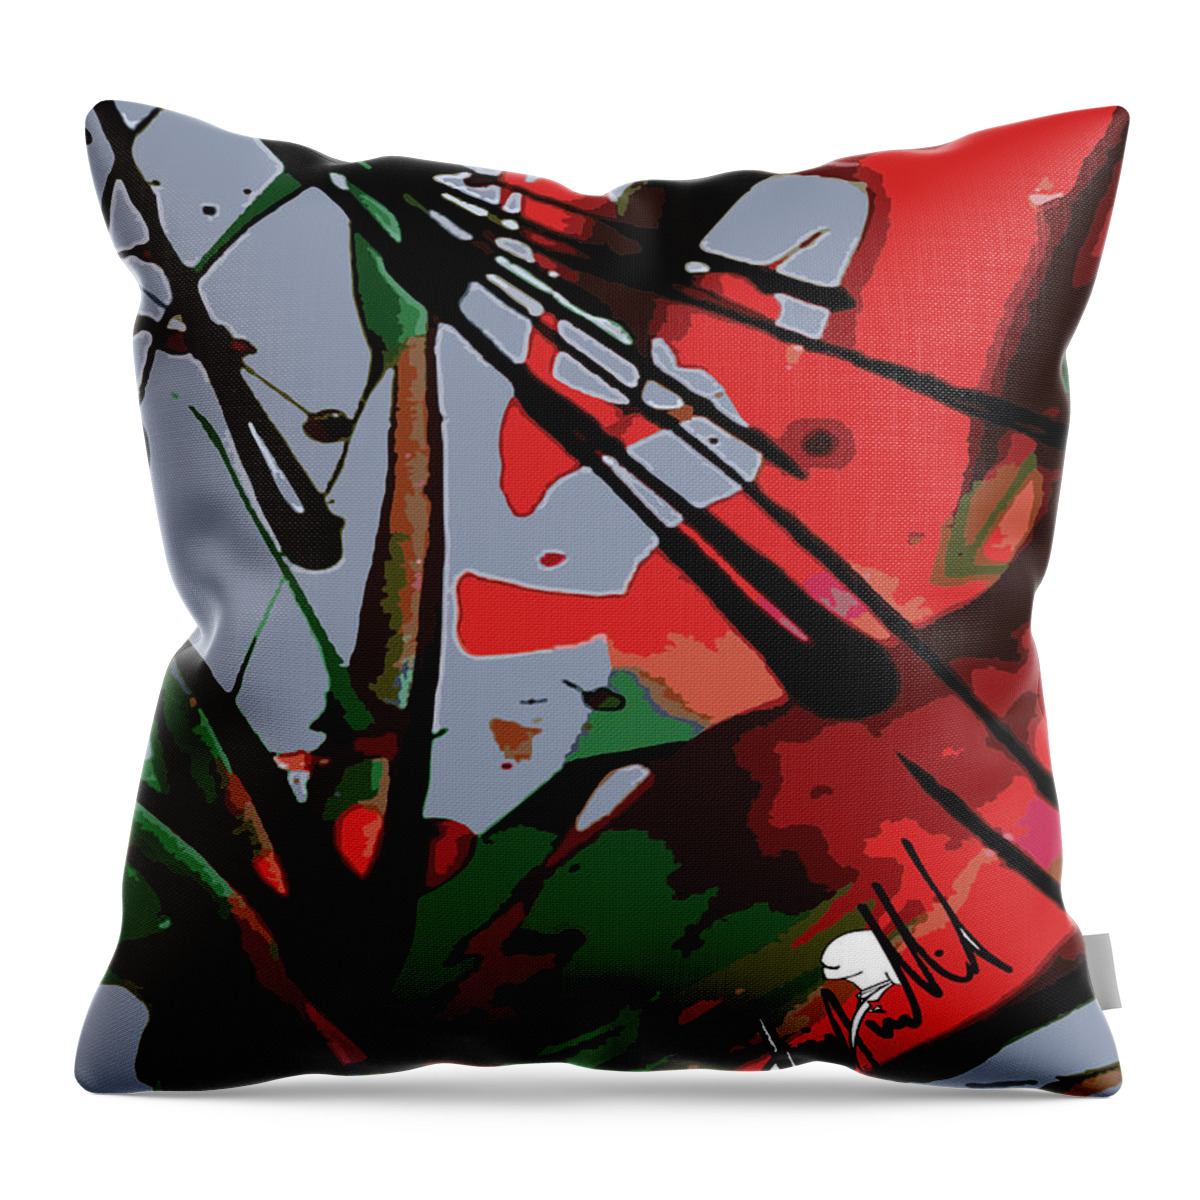  Throw Pillow featuring the digital art Future by Jimmy Williams